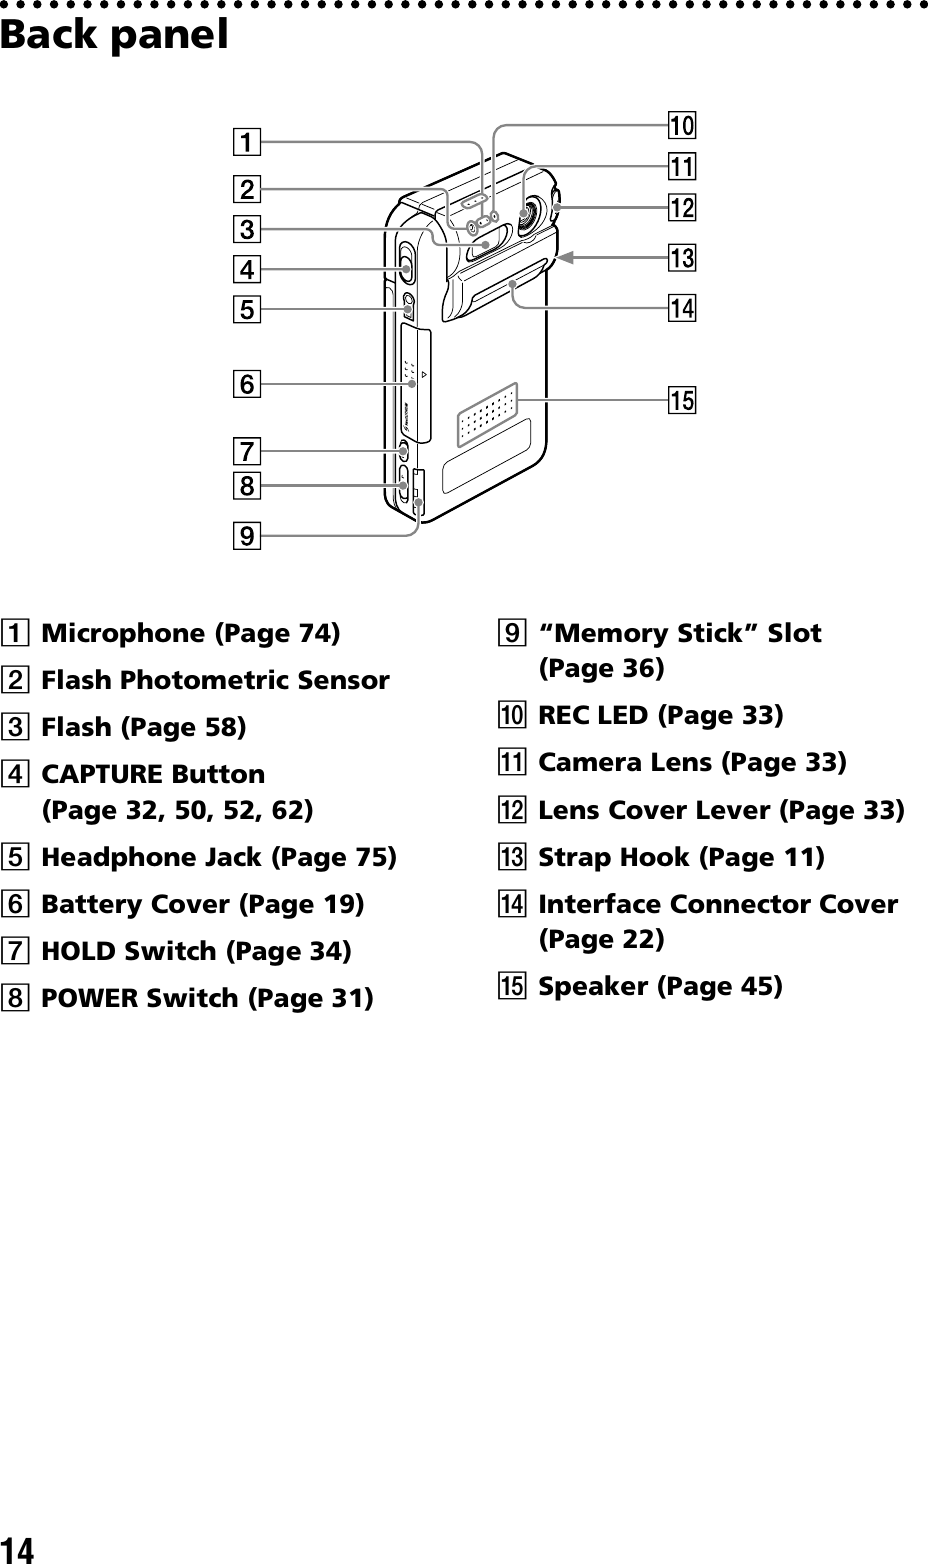 14Back panelAMicrophone (Page 74)BFlash Photometric SensorCFlash (Page 58)DCAPTURE Button (Page 32, 50, 52, 62)EHeadphone Jack (Page 75)FBattery Cover (Page 19)GHOLD Switch (Page 34)HPOWER Switch (Page 31)I“Memory Stick” Slot (Page 36)JREC LED (Page 33)KCamera Lens (Page 33)LLens Cover Lever (Page 33)MStrap Hook (Page 11)NInterface Connector Cover (Page 22)OSpeaker (Page 45)